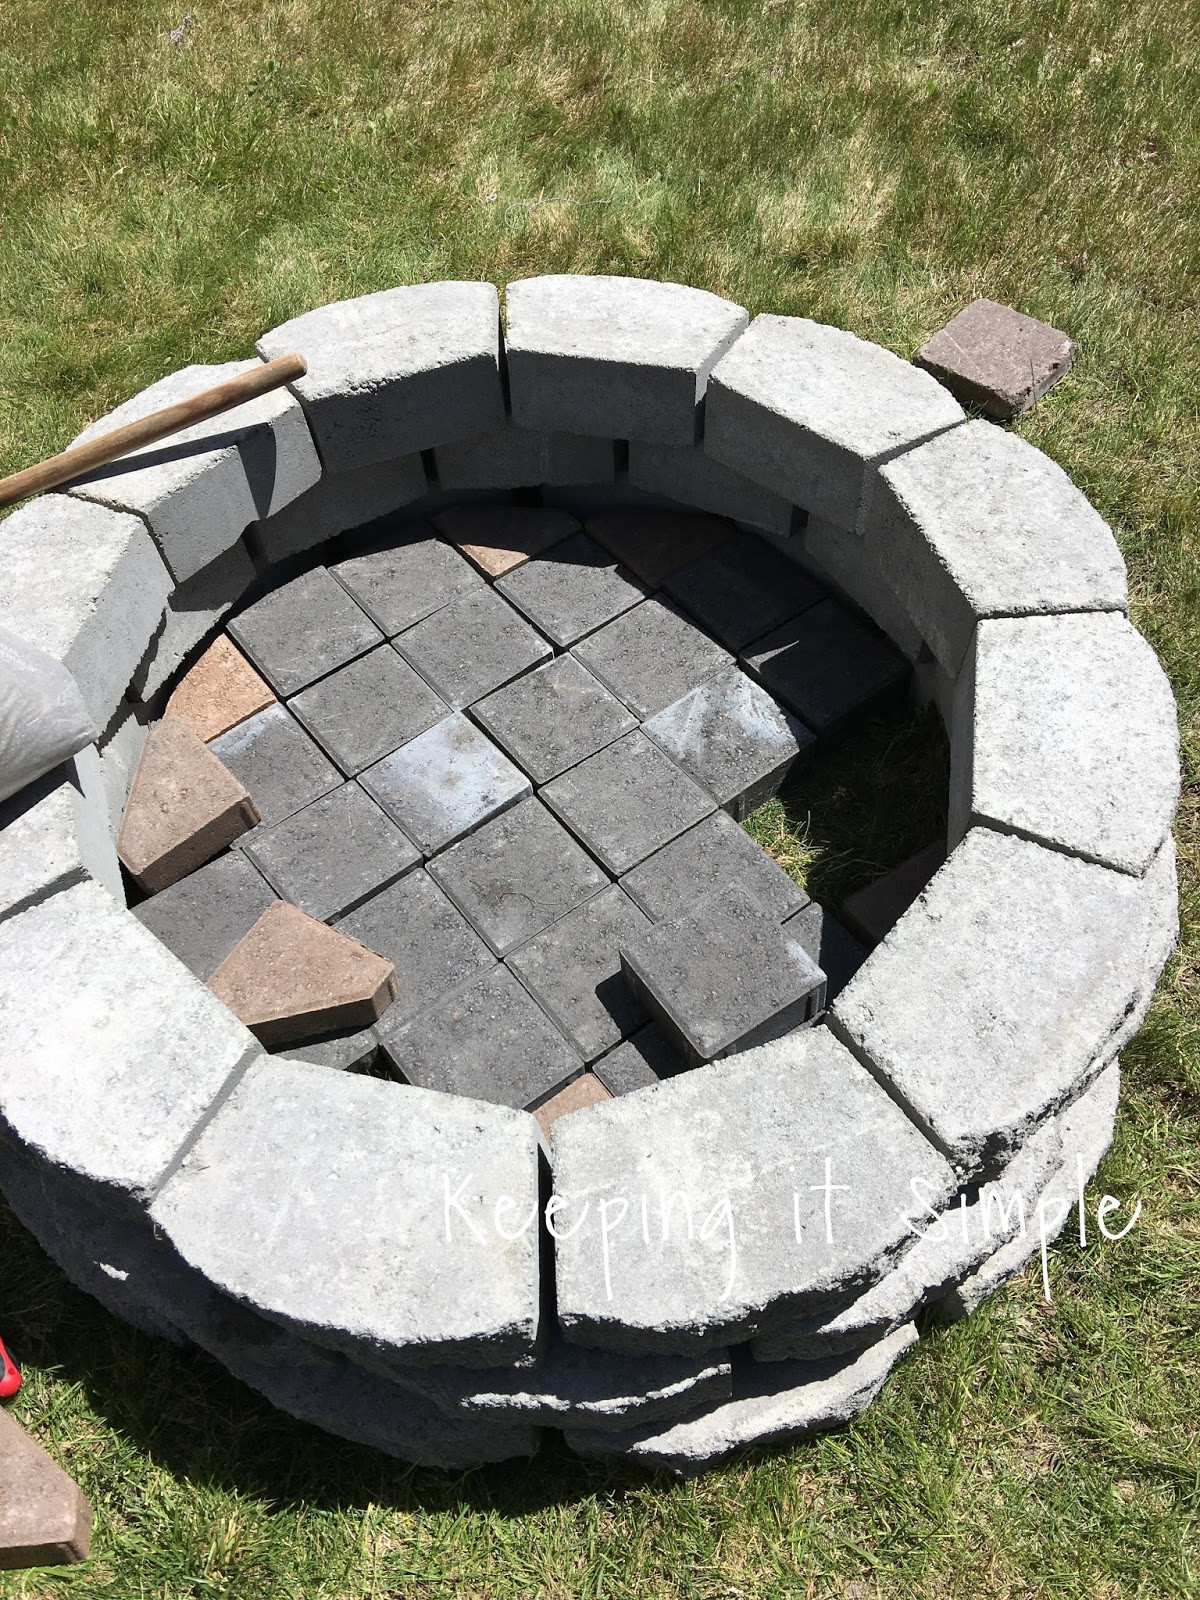 Diy Outdoor Firepit
 How to Build a DIY Fire Pit for ly $60 • Keeping it